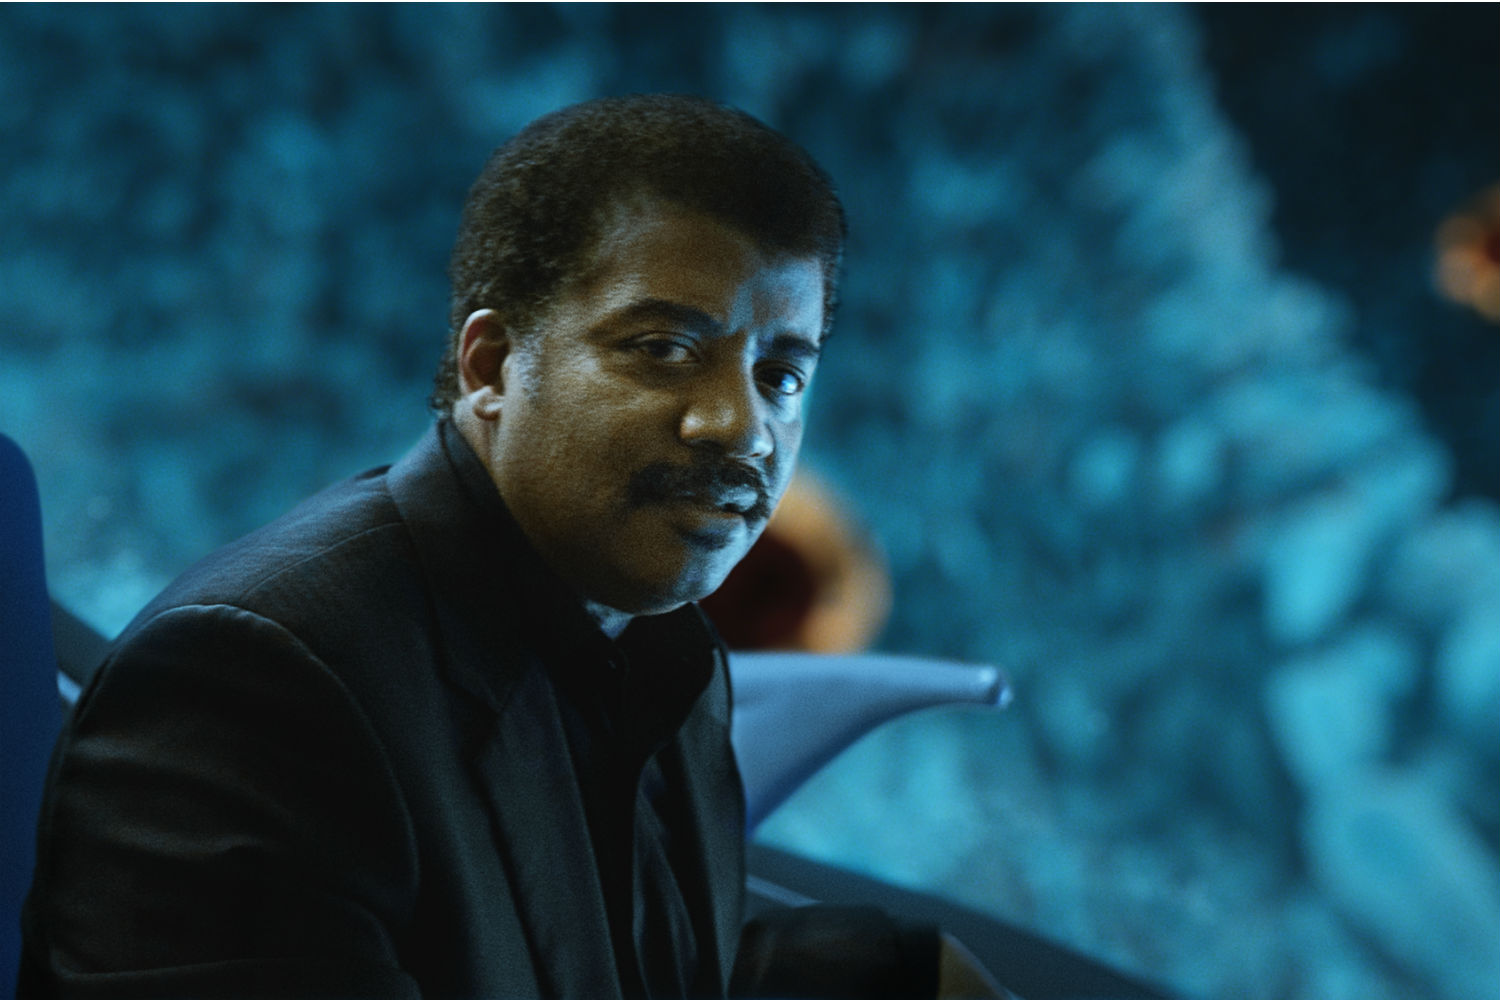 Neil deGrasse Tyson, who hosts "Cosmos: A Spacetime Odyssey," isn't afraid to poke fun at himself. (Fox)